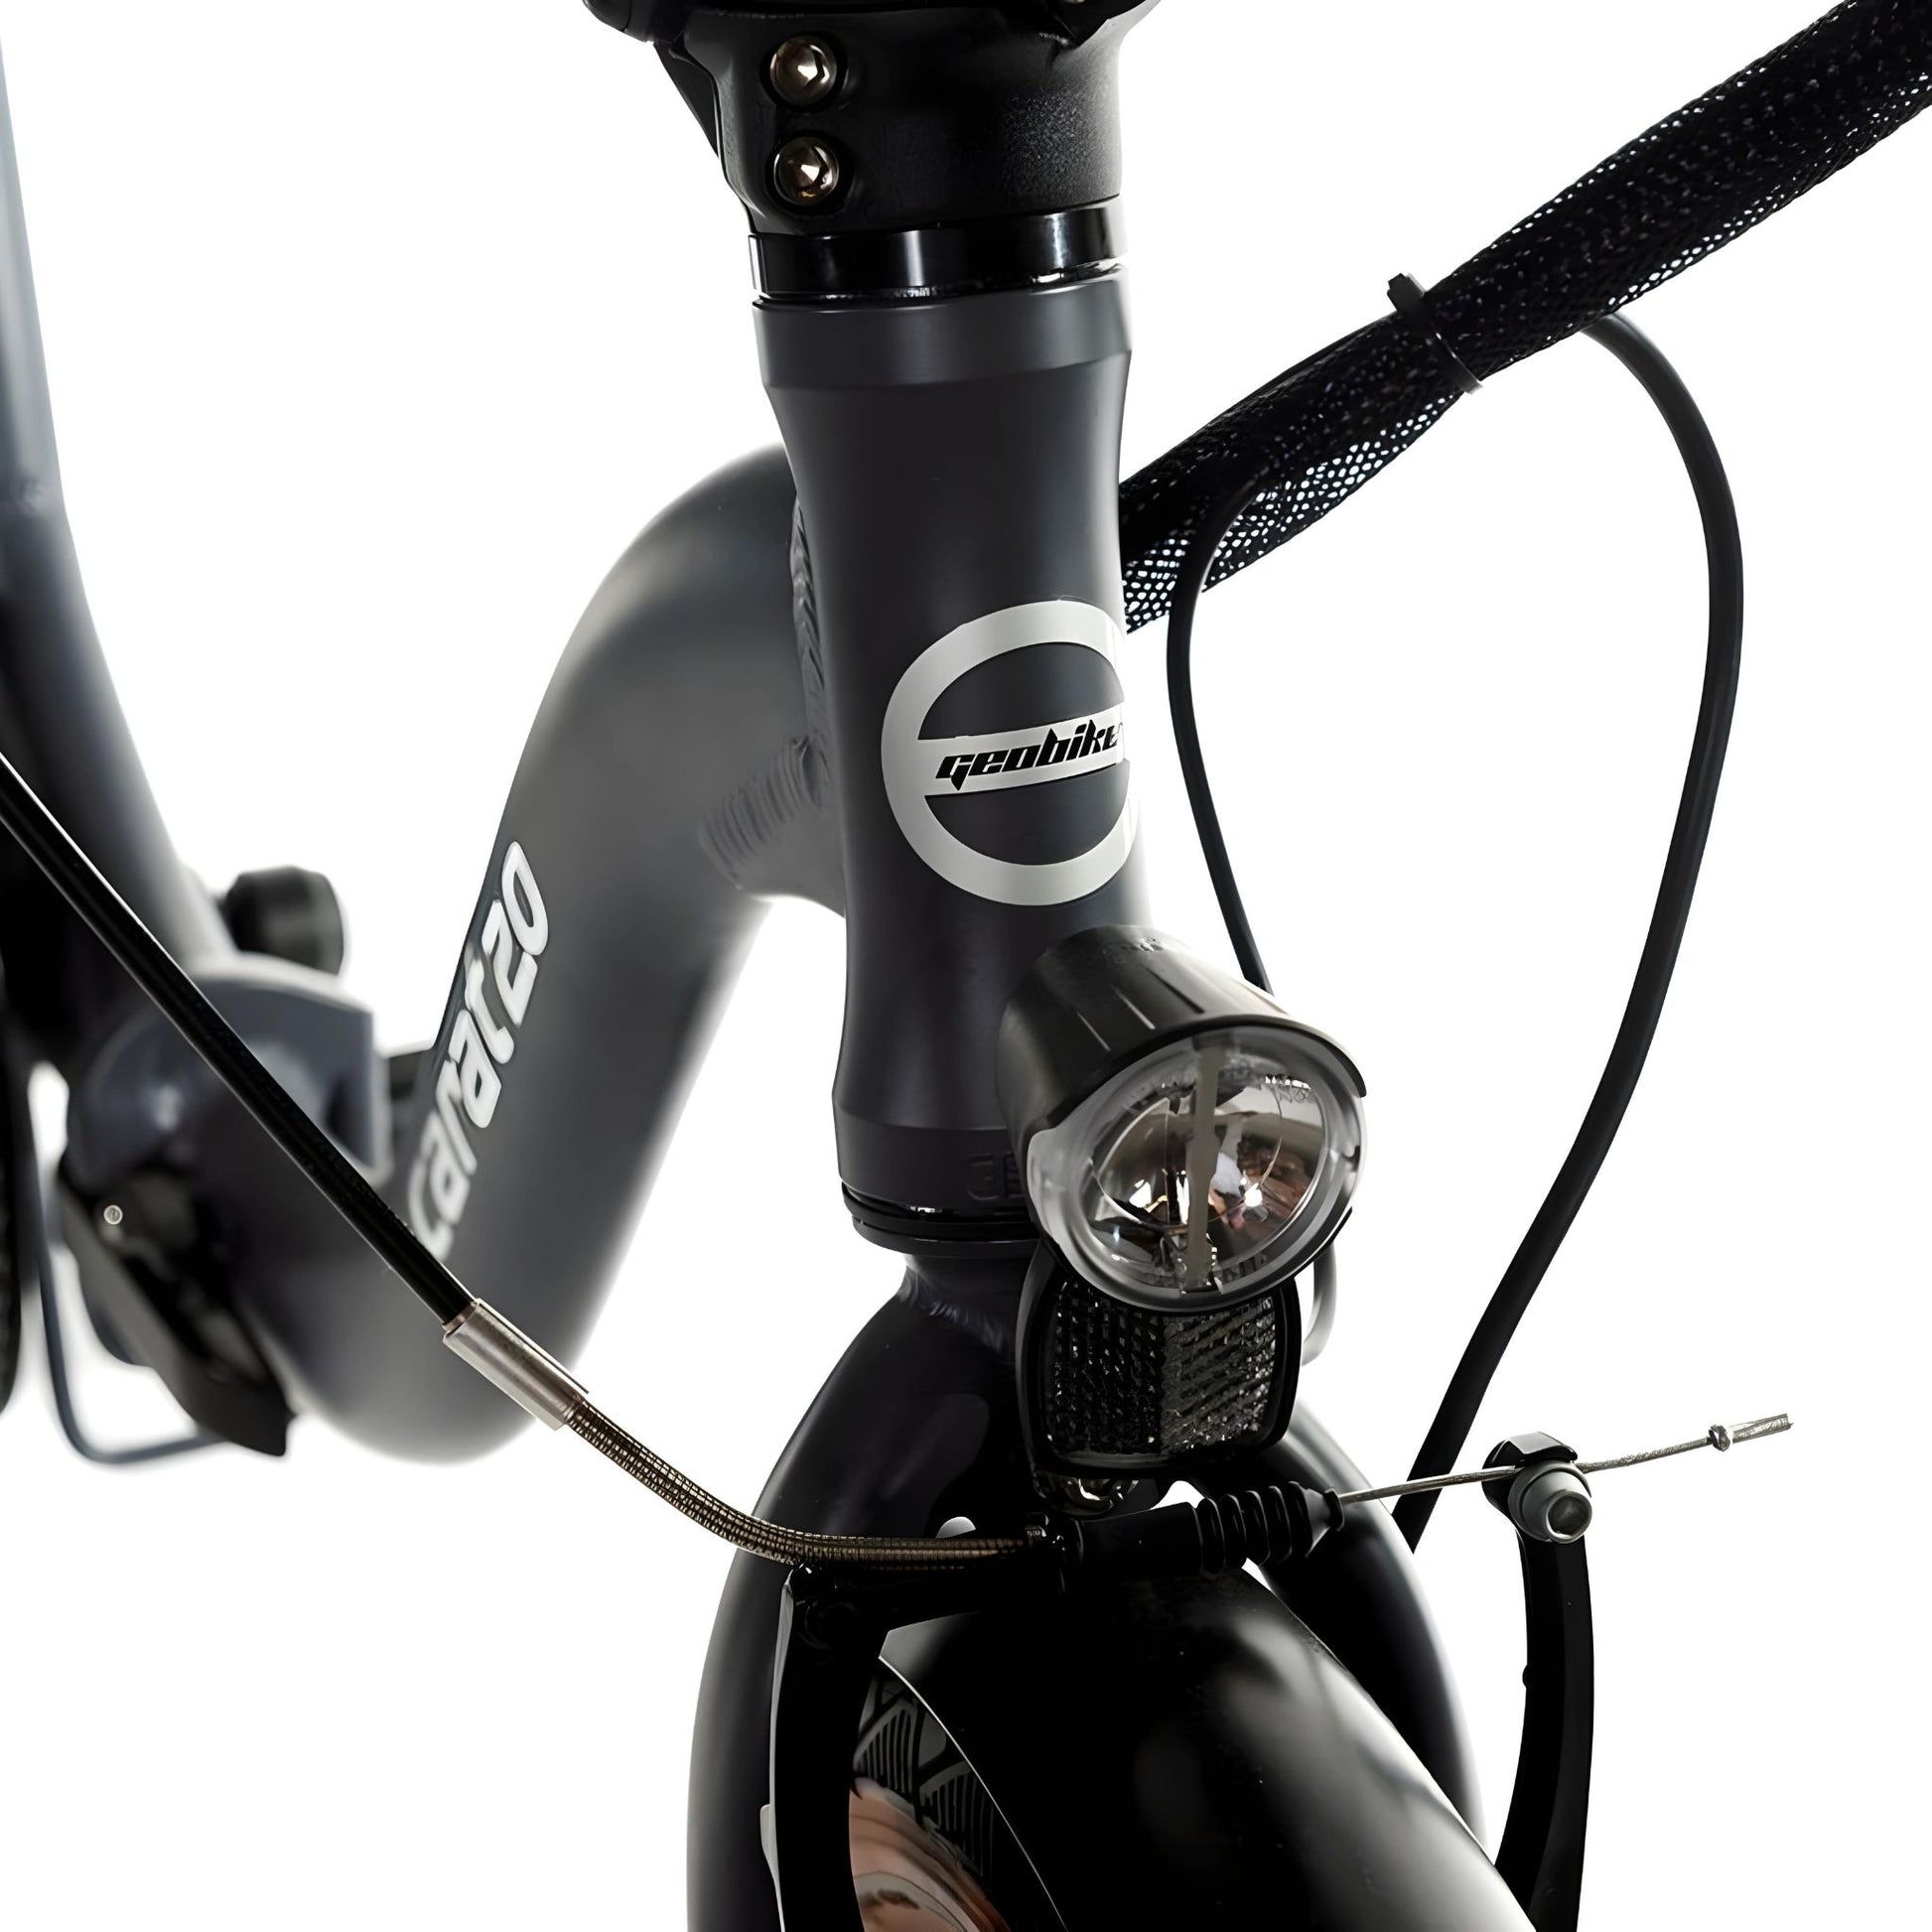 A close-up of the front light and handle of the Geobike Carat 2.0 E-Bike.